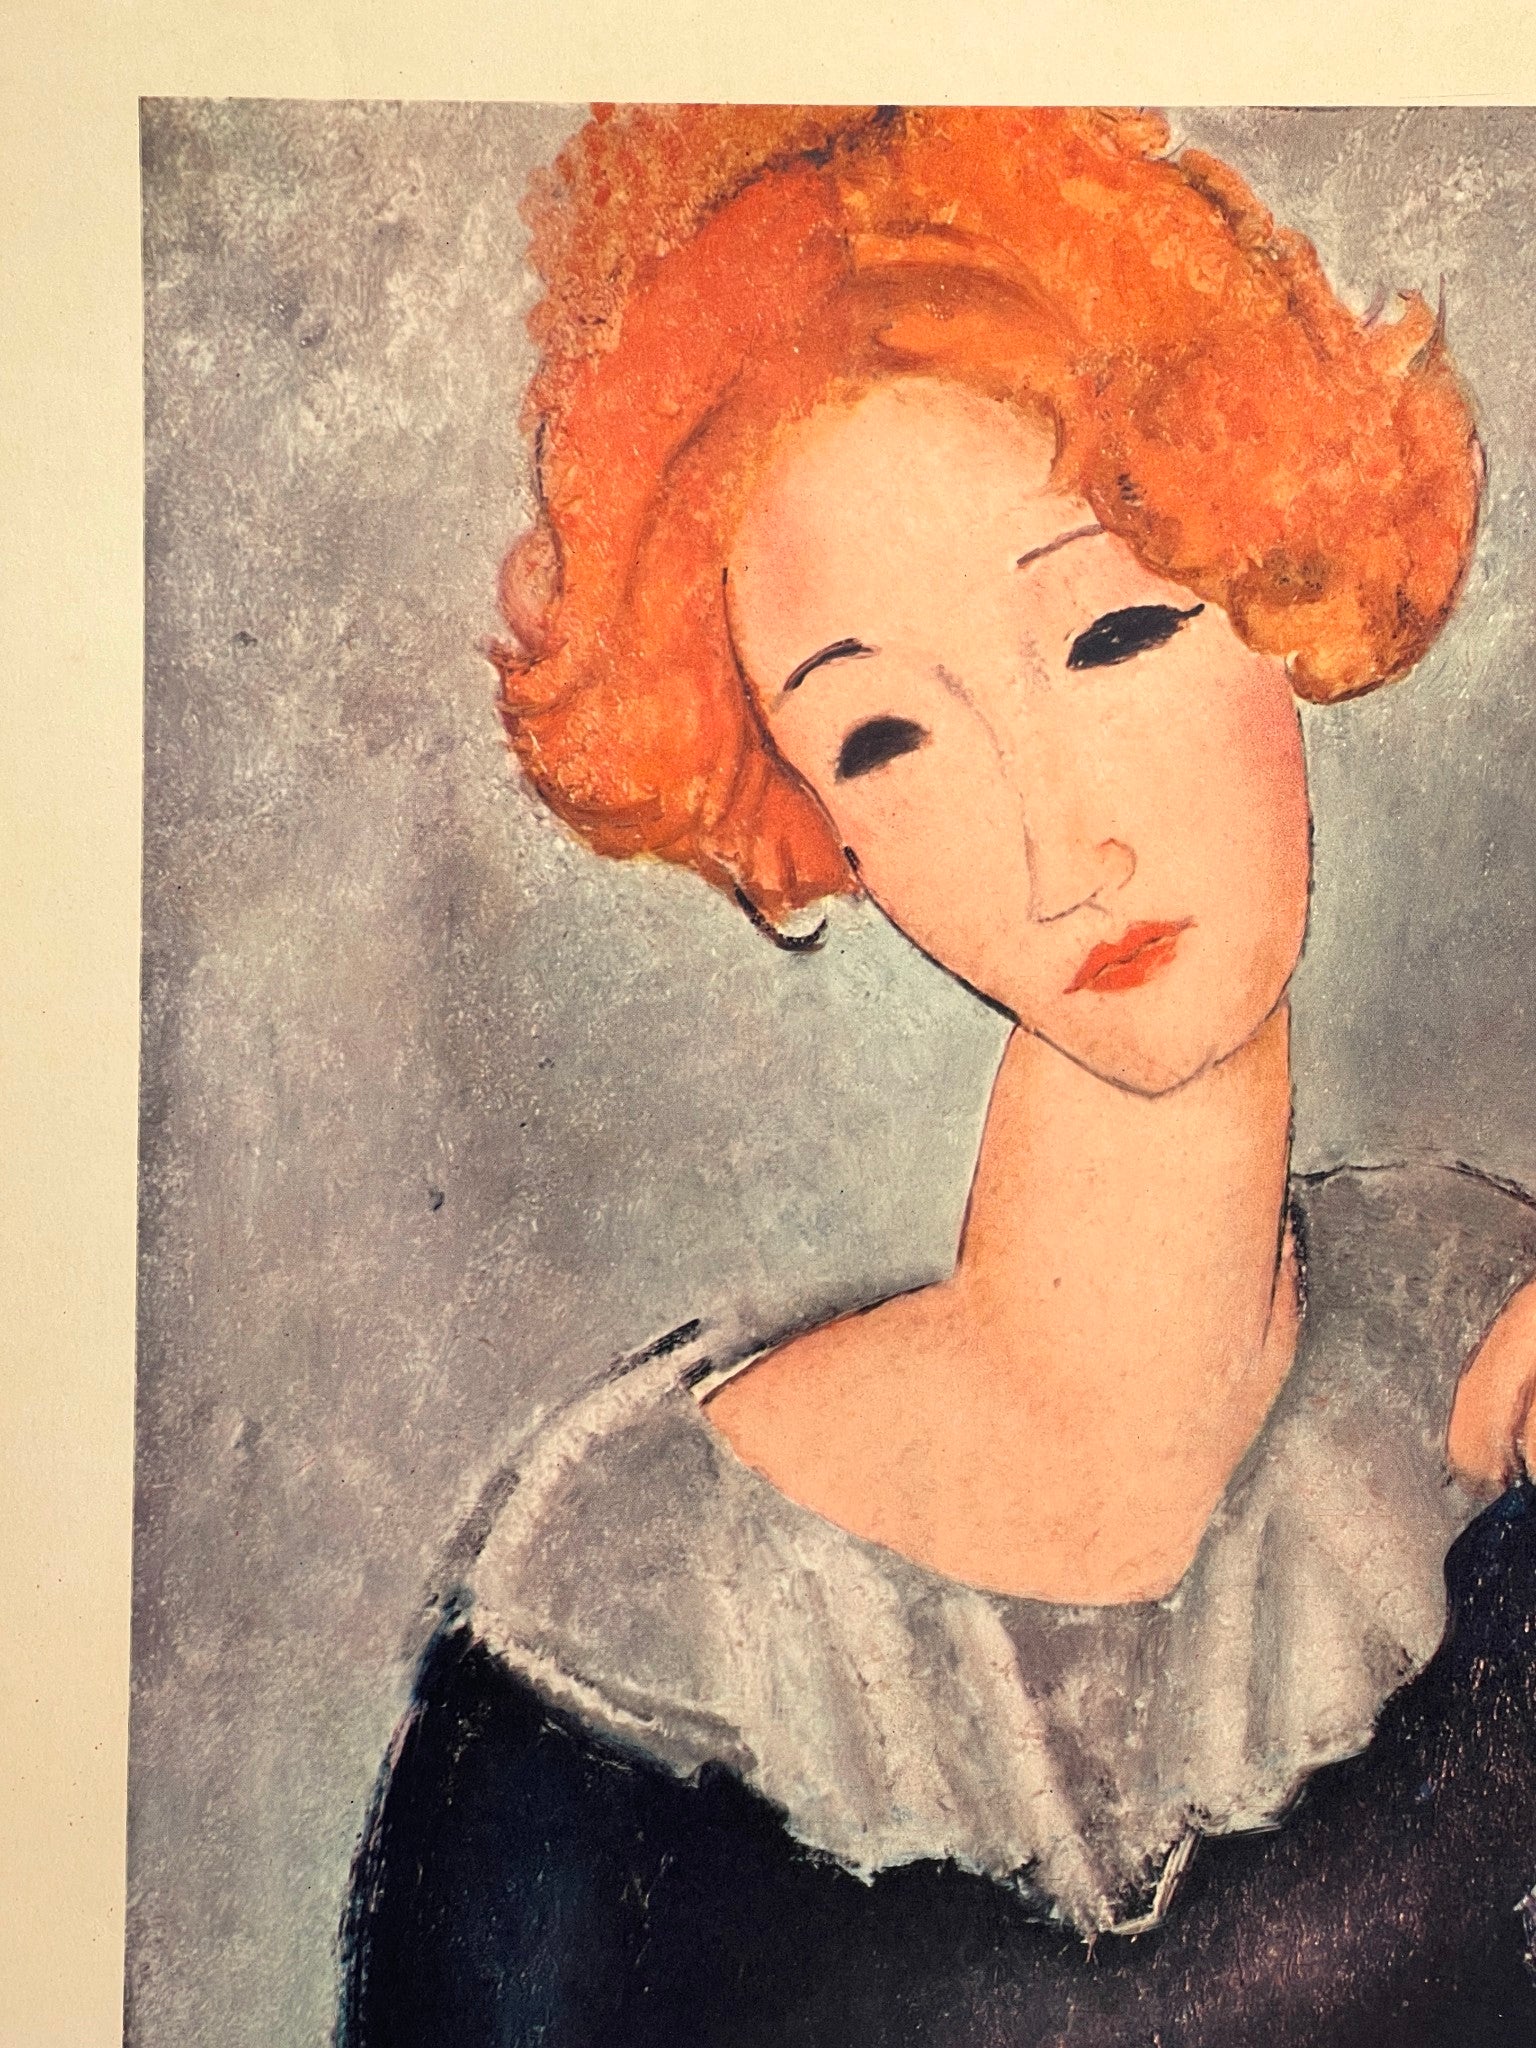 Poster "Woman with Red Hair" - Amedeo Modigliani - National Gallery of Art - Dahlströms Fine Art